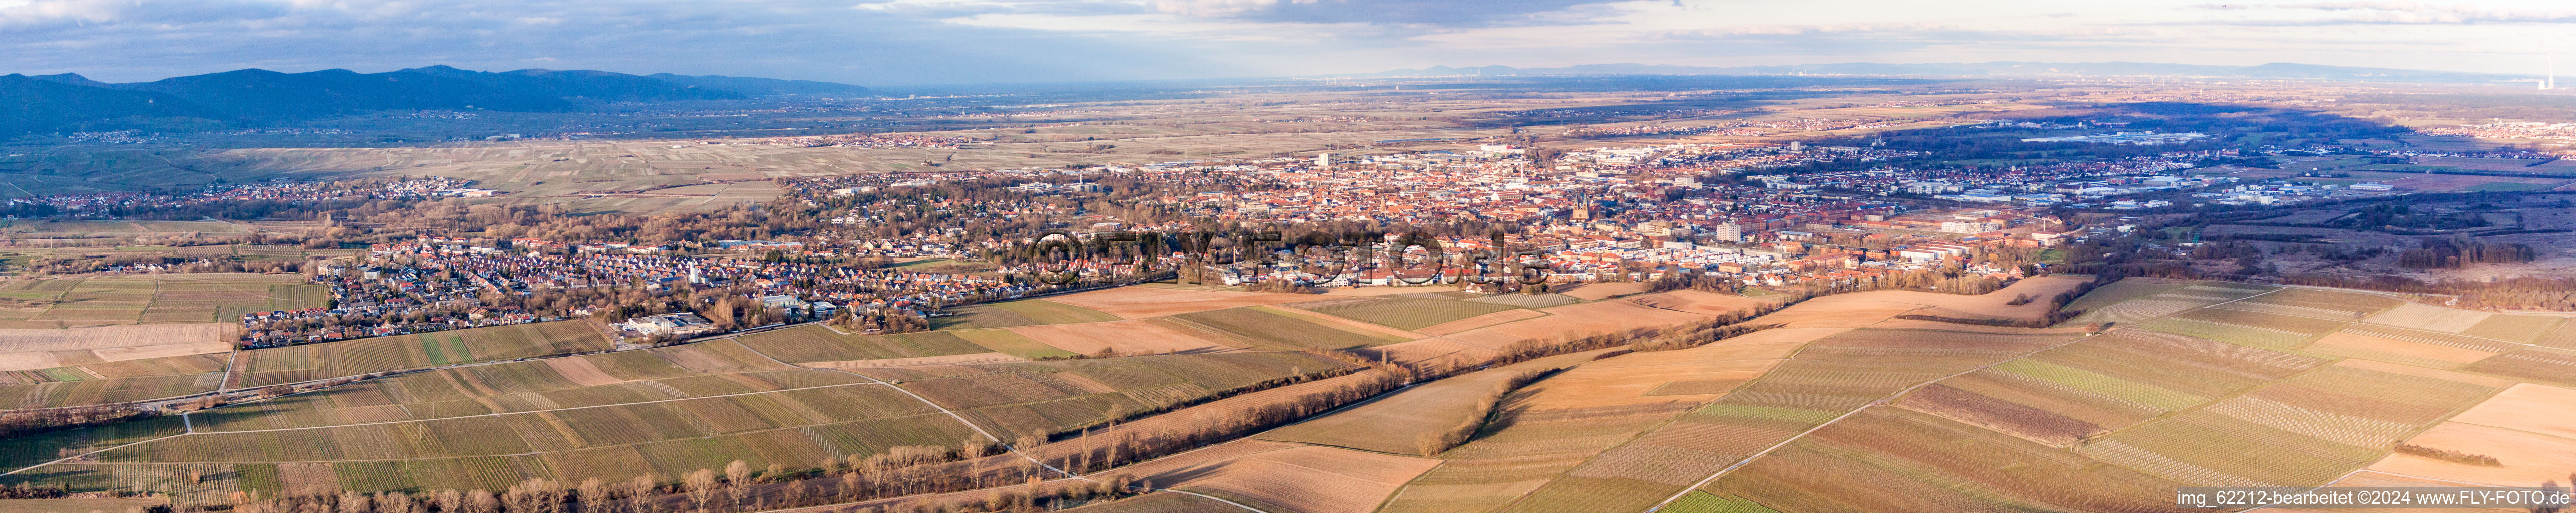 Aerial view of Panoramic perspective City area with outside districts and inner city area in Landau in der Pfalz in the state Rhineland-Palatinate, Germany